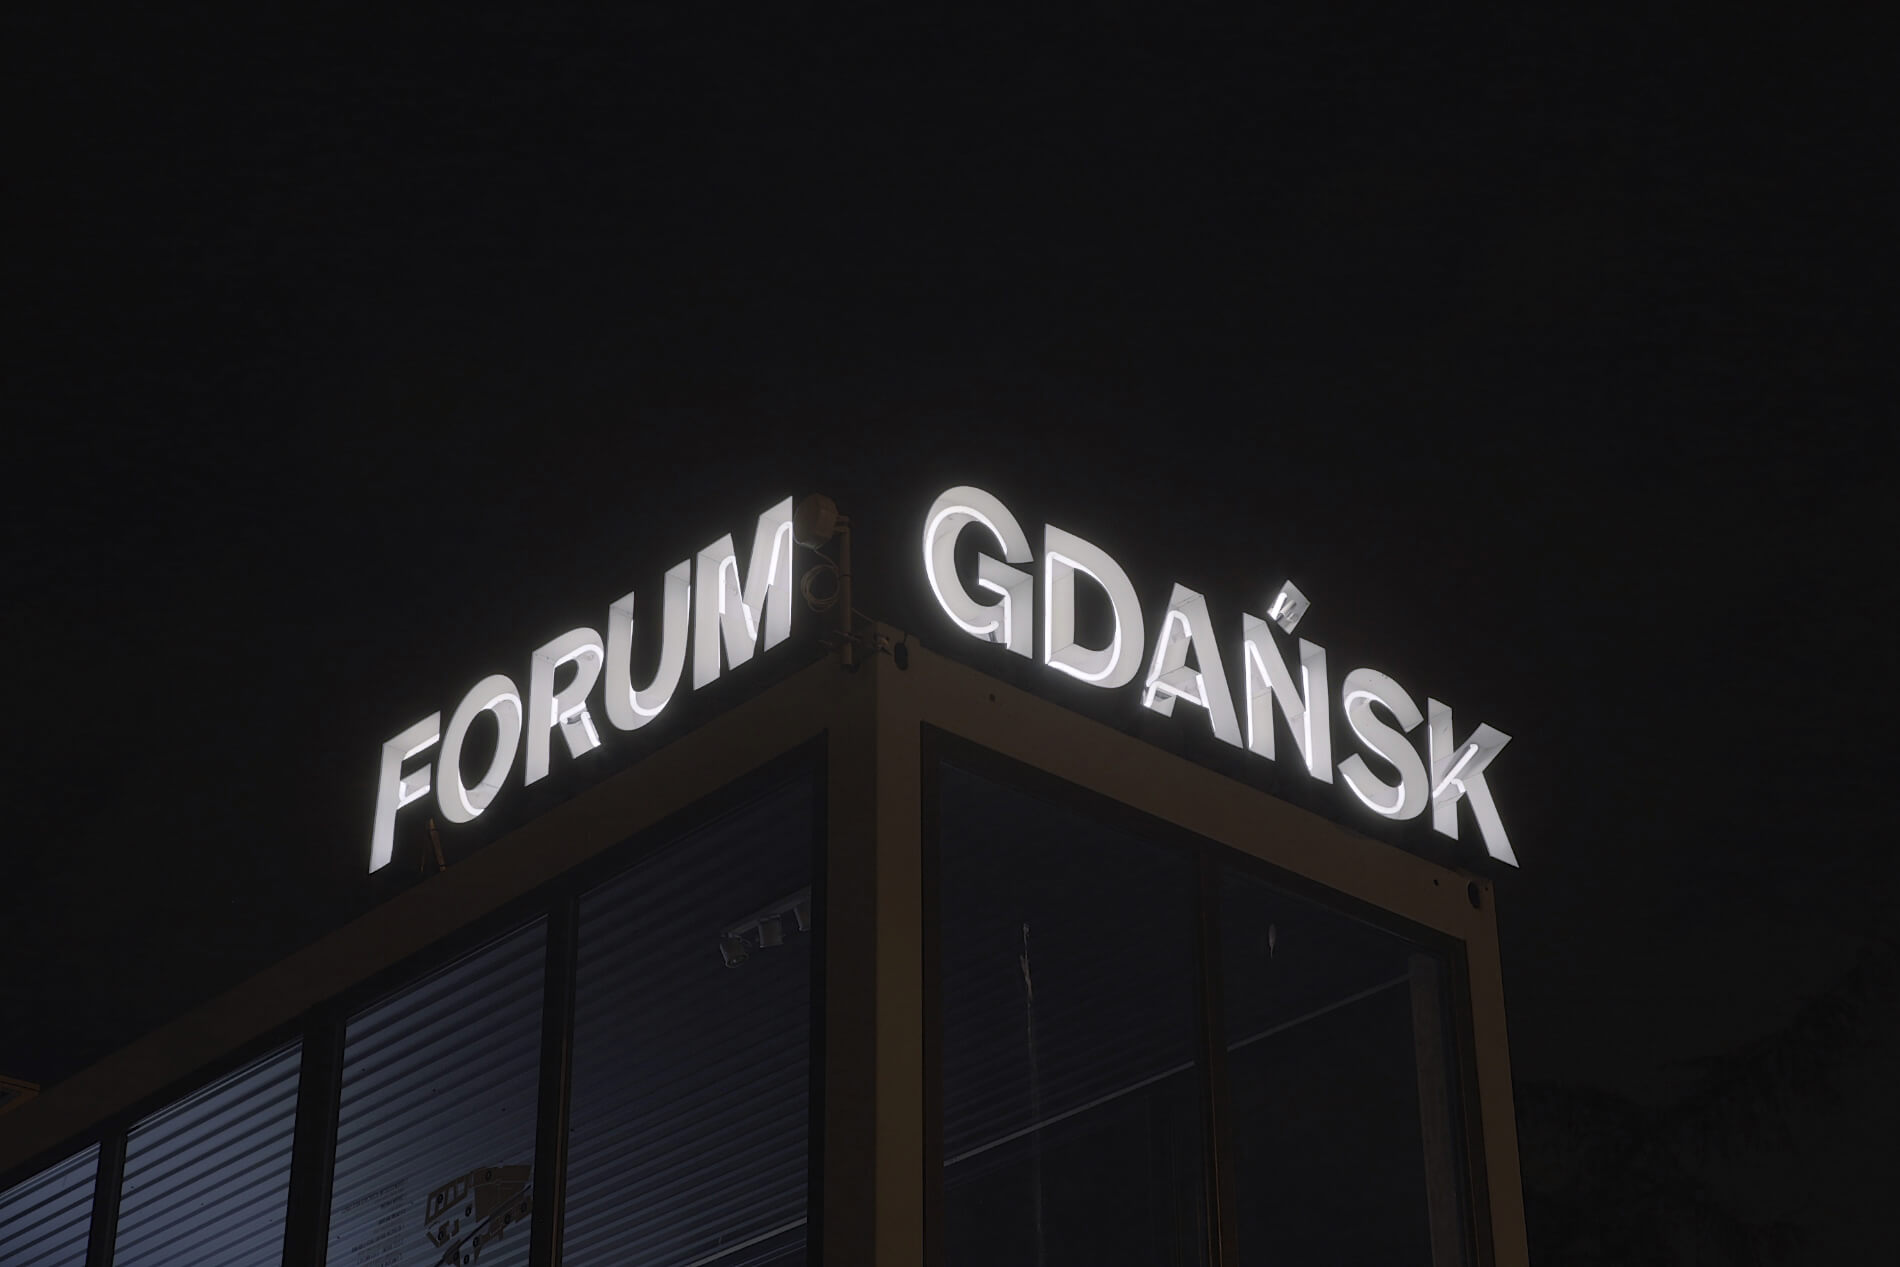 Forum Gdańsk information - Gdansk Forum - lighted letters with a neon sign, mounted on the rack, placed on the roof of the building